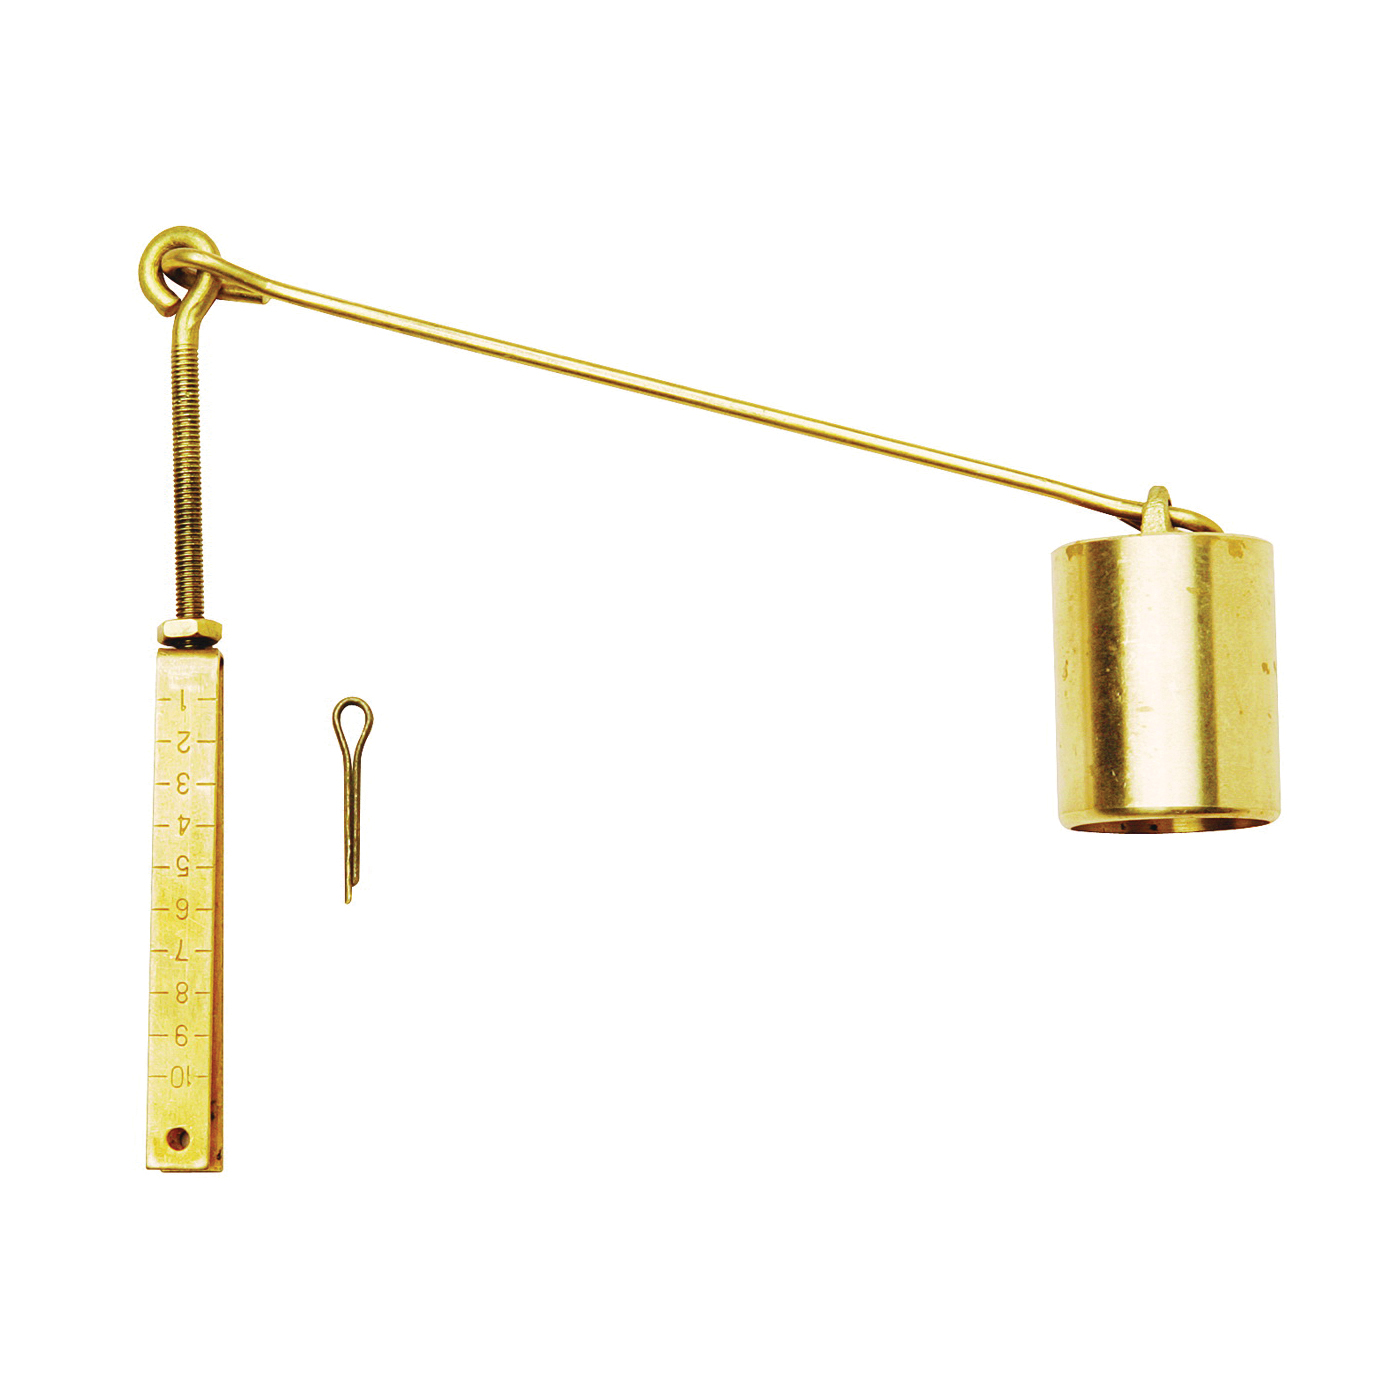 PP606-22 Linkage Assembly, Brass, For: Trip-Lever 6 in Eye Wire, #10 to #32 Eye Bolts